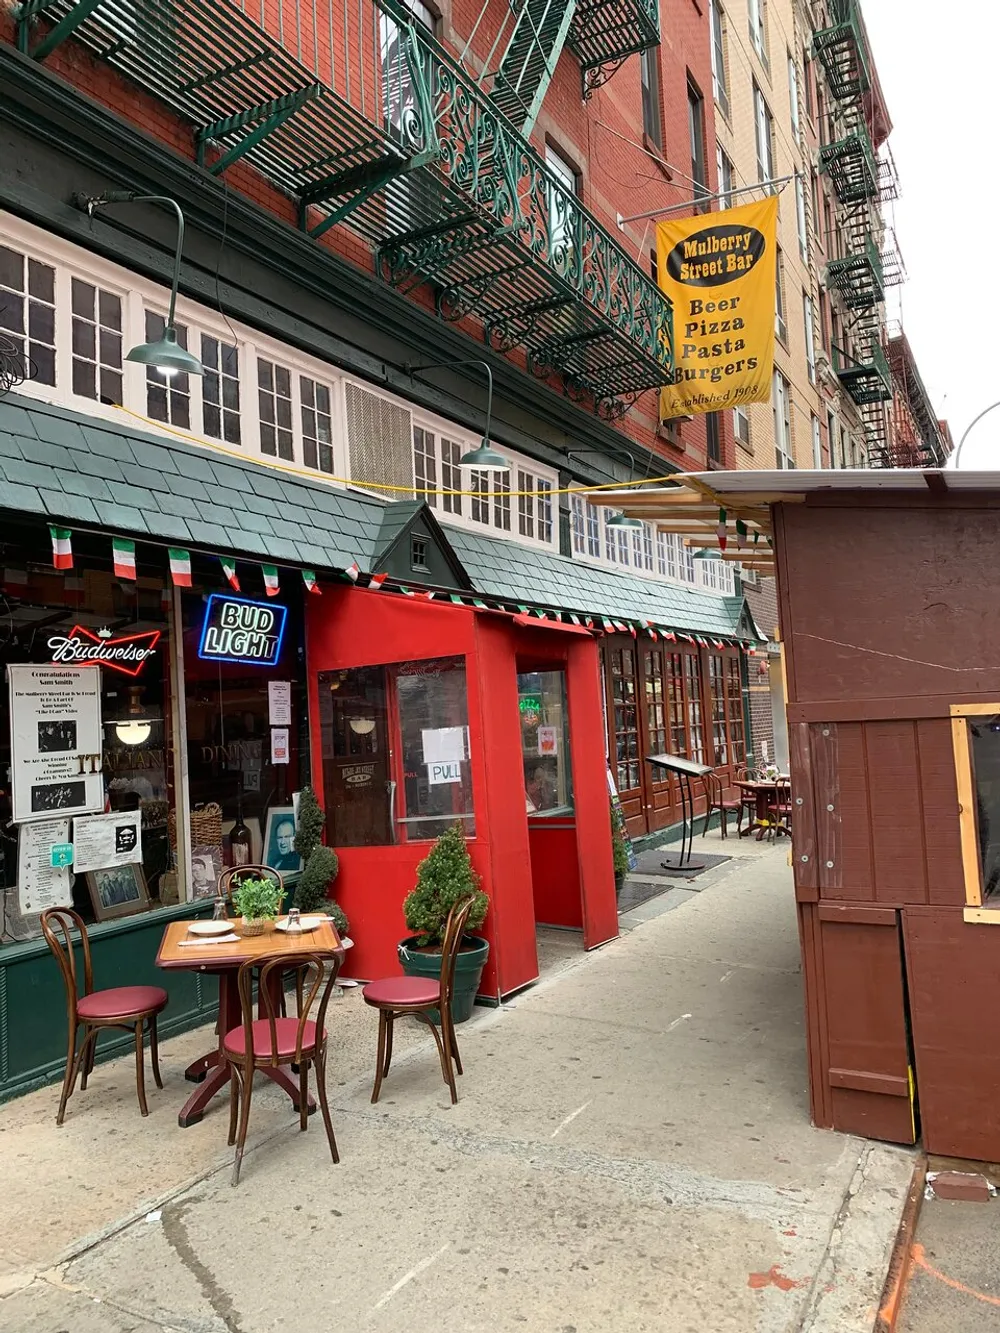 The image shows a quaint street view with the Mulberry Street Bar featuring outdoor tables and classic Italian restaurant signage nestled among traditional-style buildings with iron fire escapes